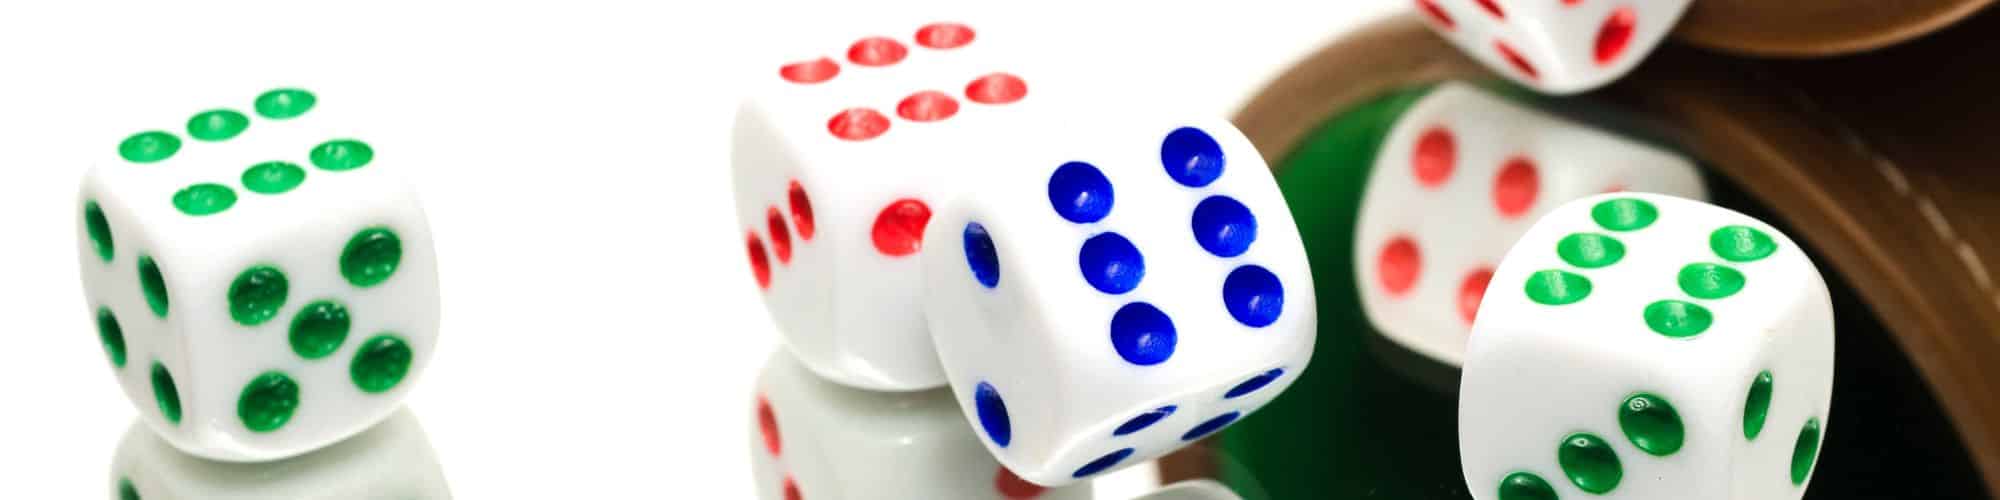 A close up of a dice game